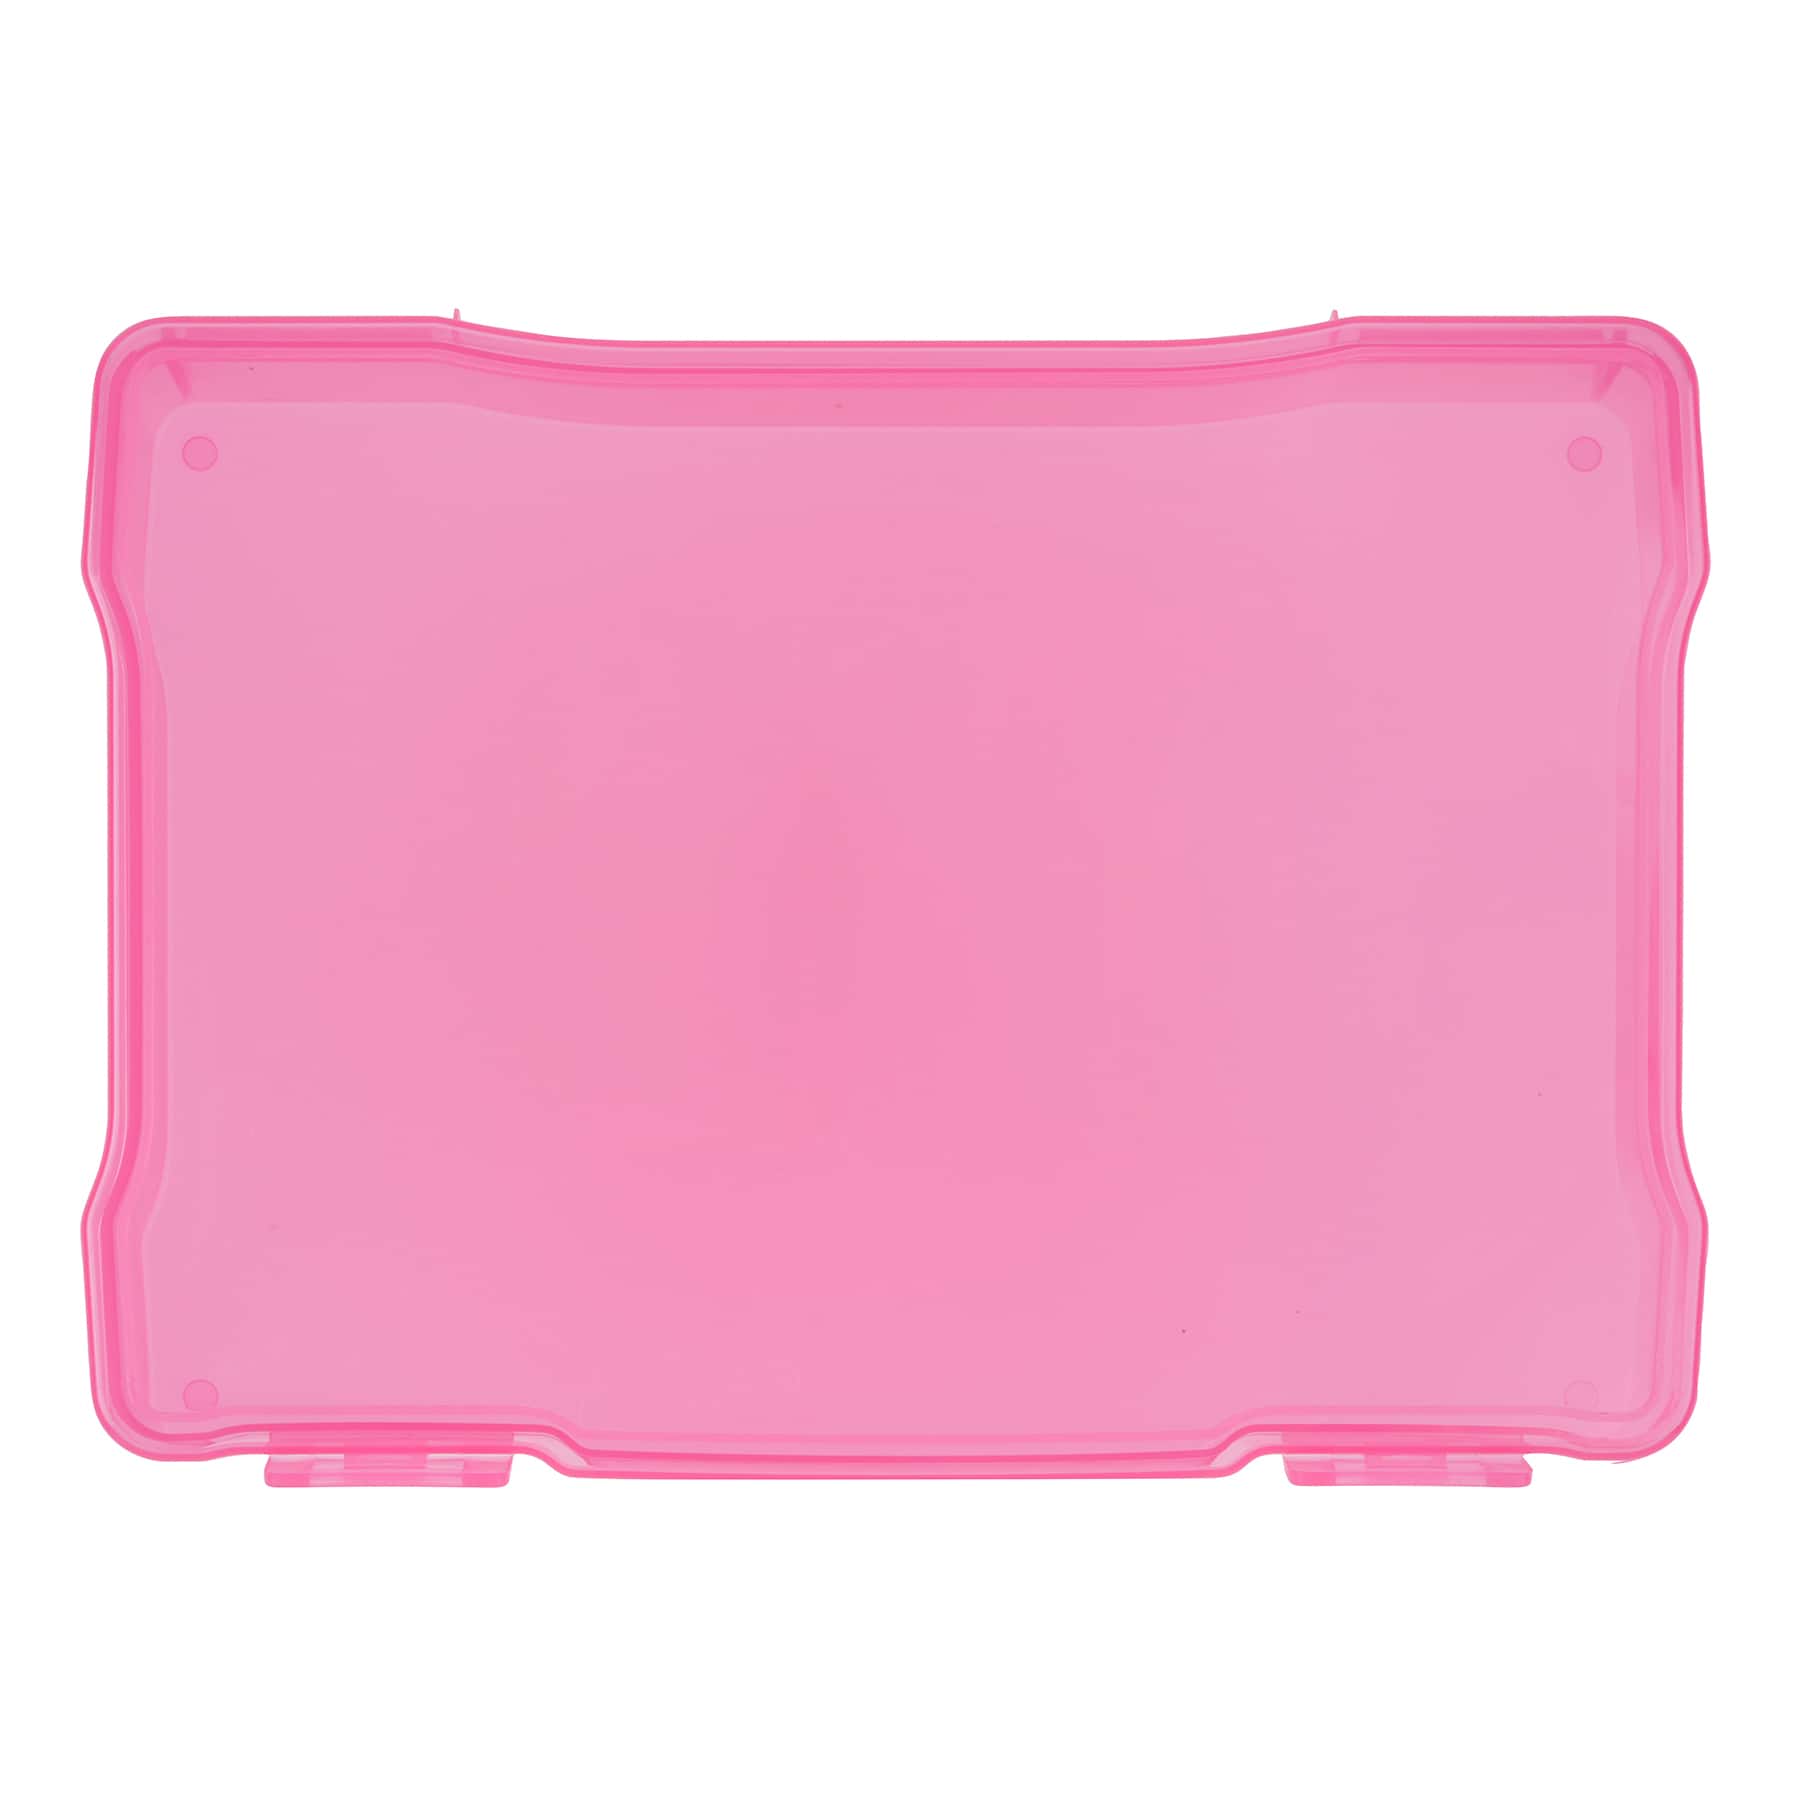 Simply Tidy Plastic Photo Case - Pink - 5 x 7 in